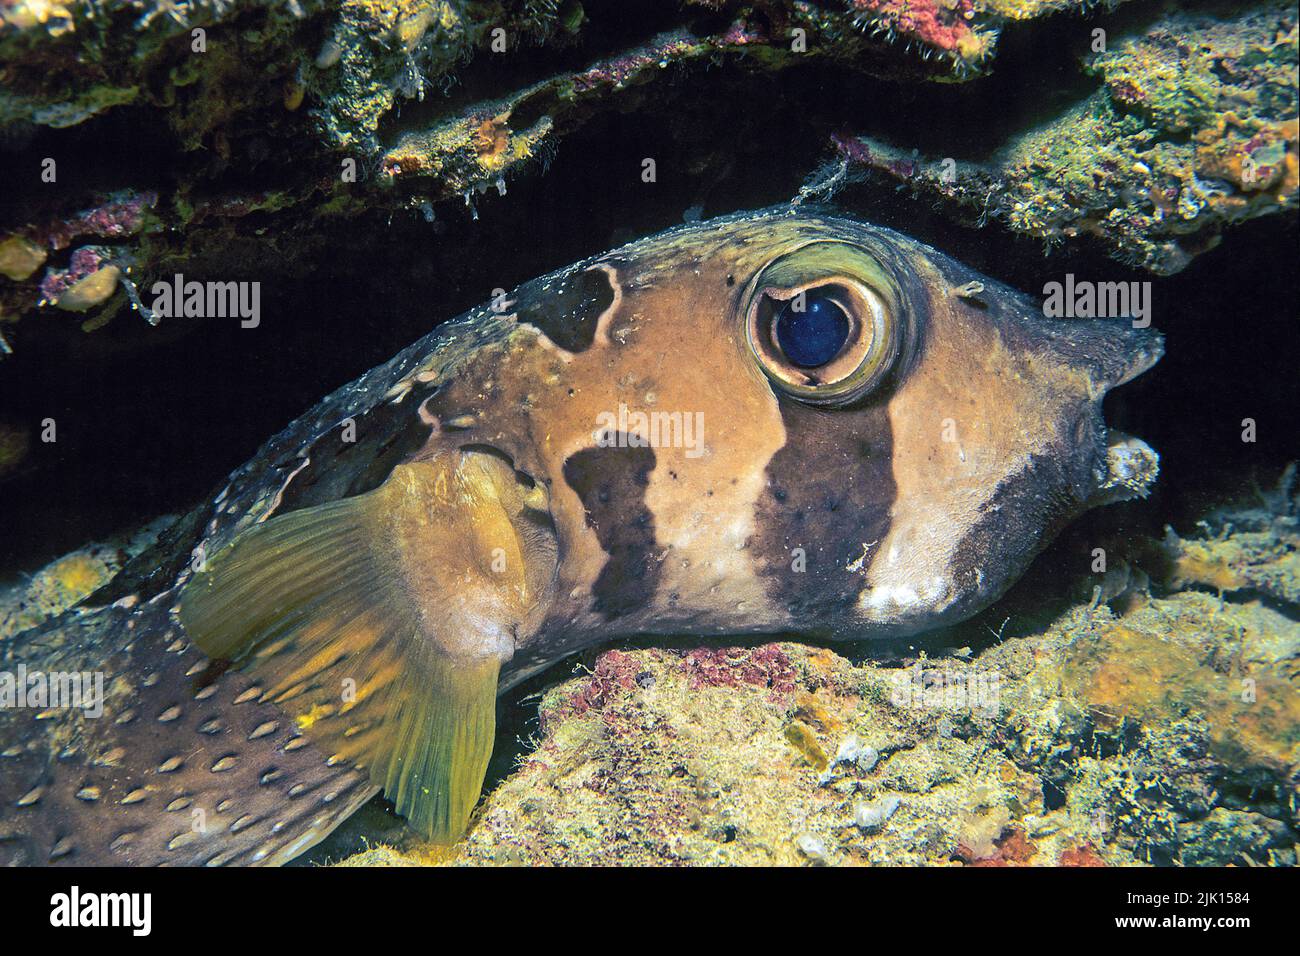 Black-blotched porcupinefish, (Diodon liturosus), by inflating the body, the spines are erected, Ari Atoll, Maldives, Asia Stock Photo